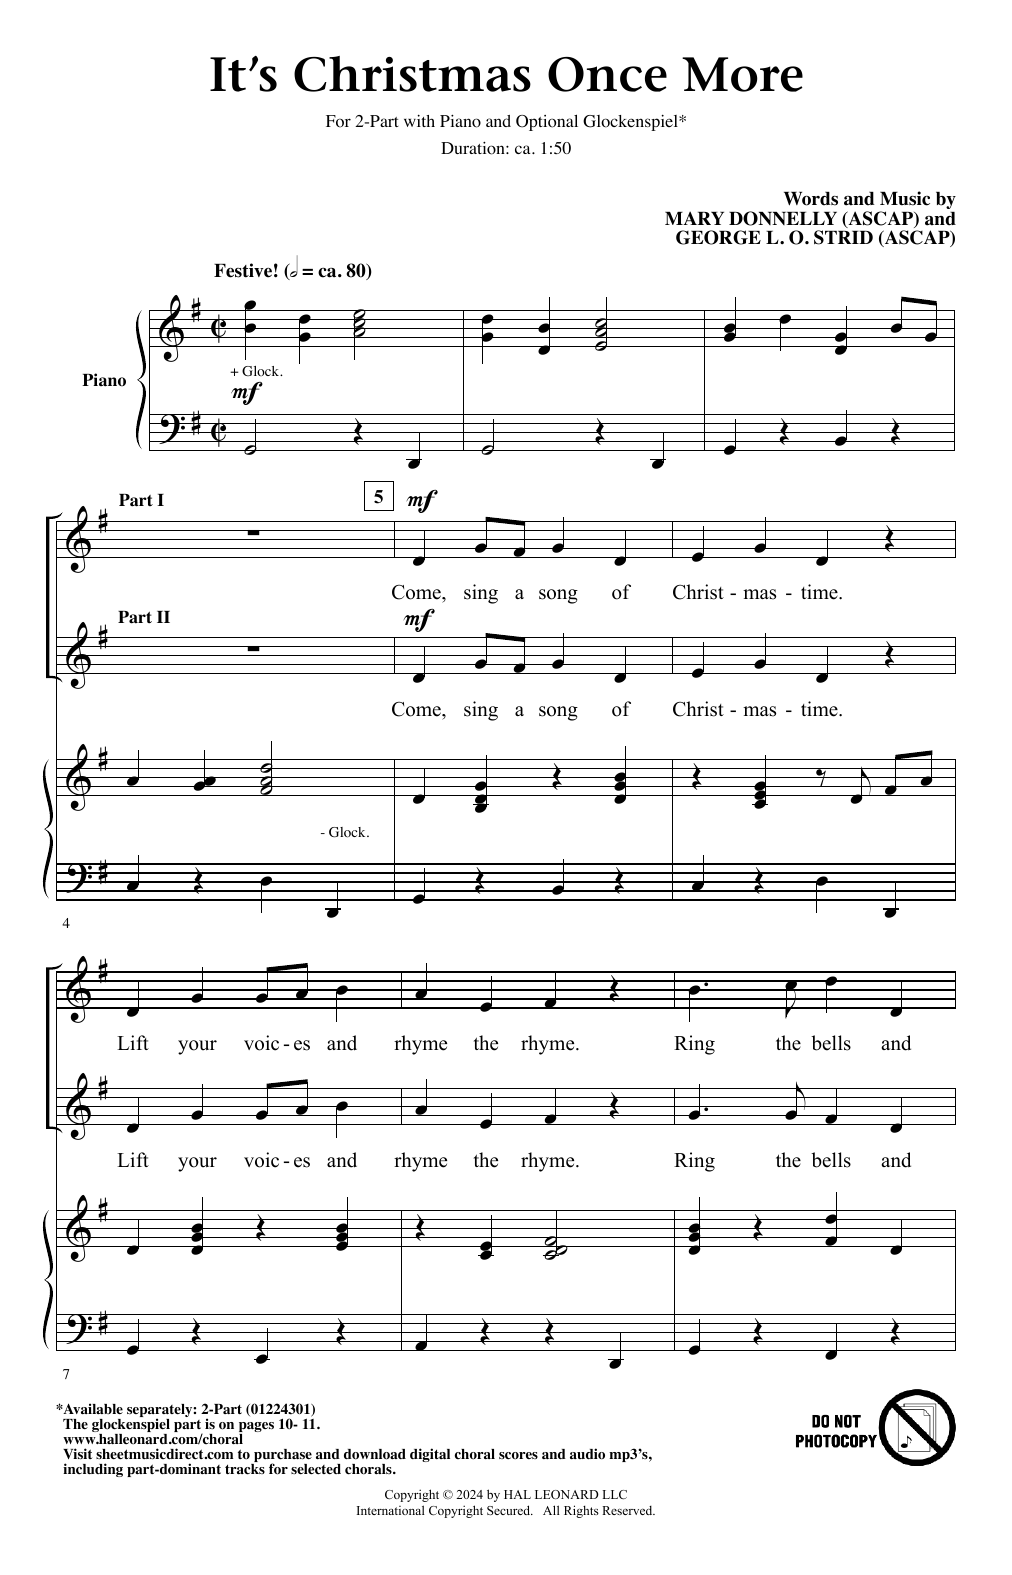 Mary Donnelly and George L.O. Strid It's Christmas Once More sheet music notes printable PDF score